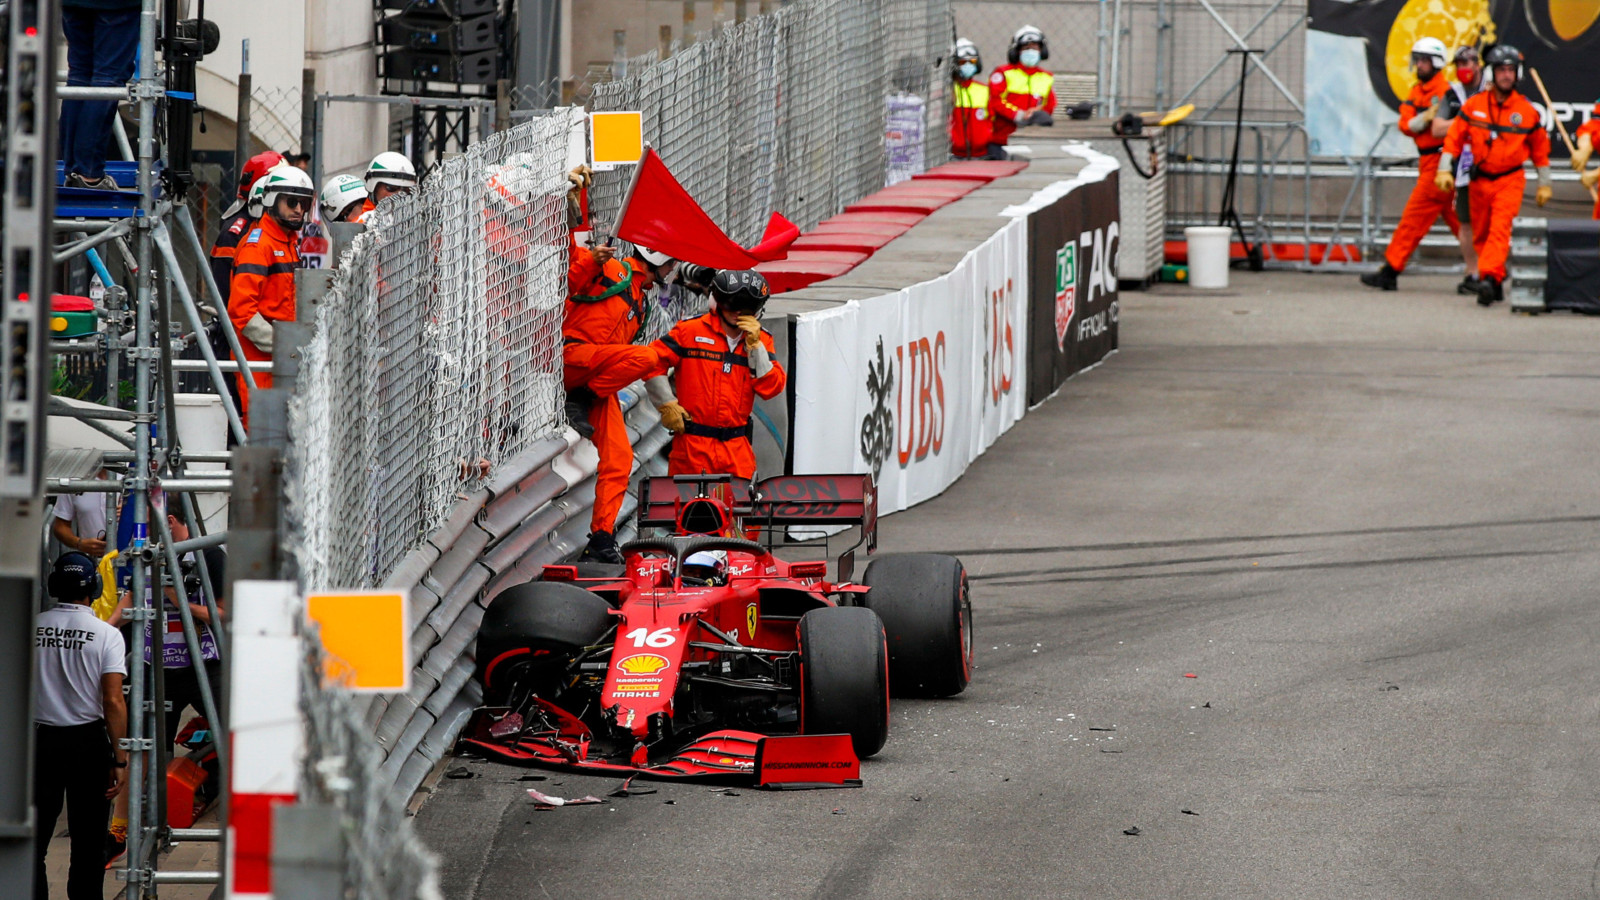 Ferrari driver Charles Leclerc crashes during qualifying for the 2021 Monaco Grand Prix. Monte Carlo, May 2021.